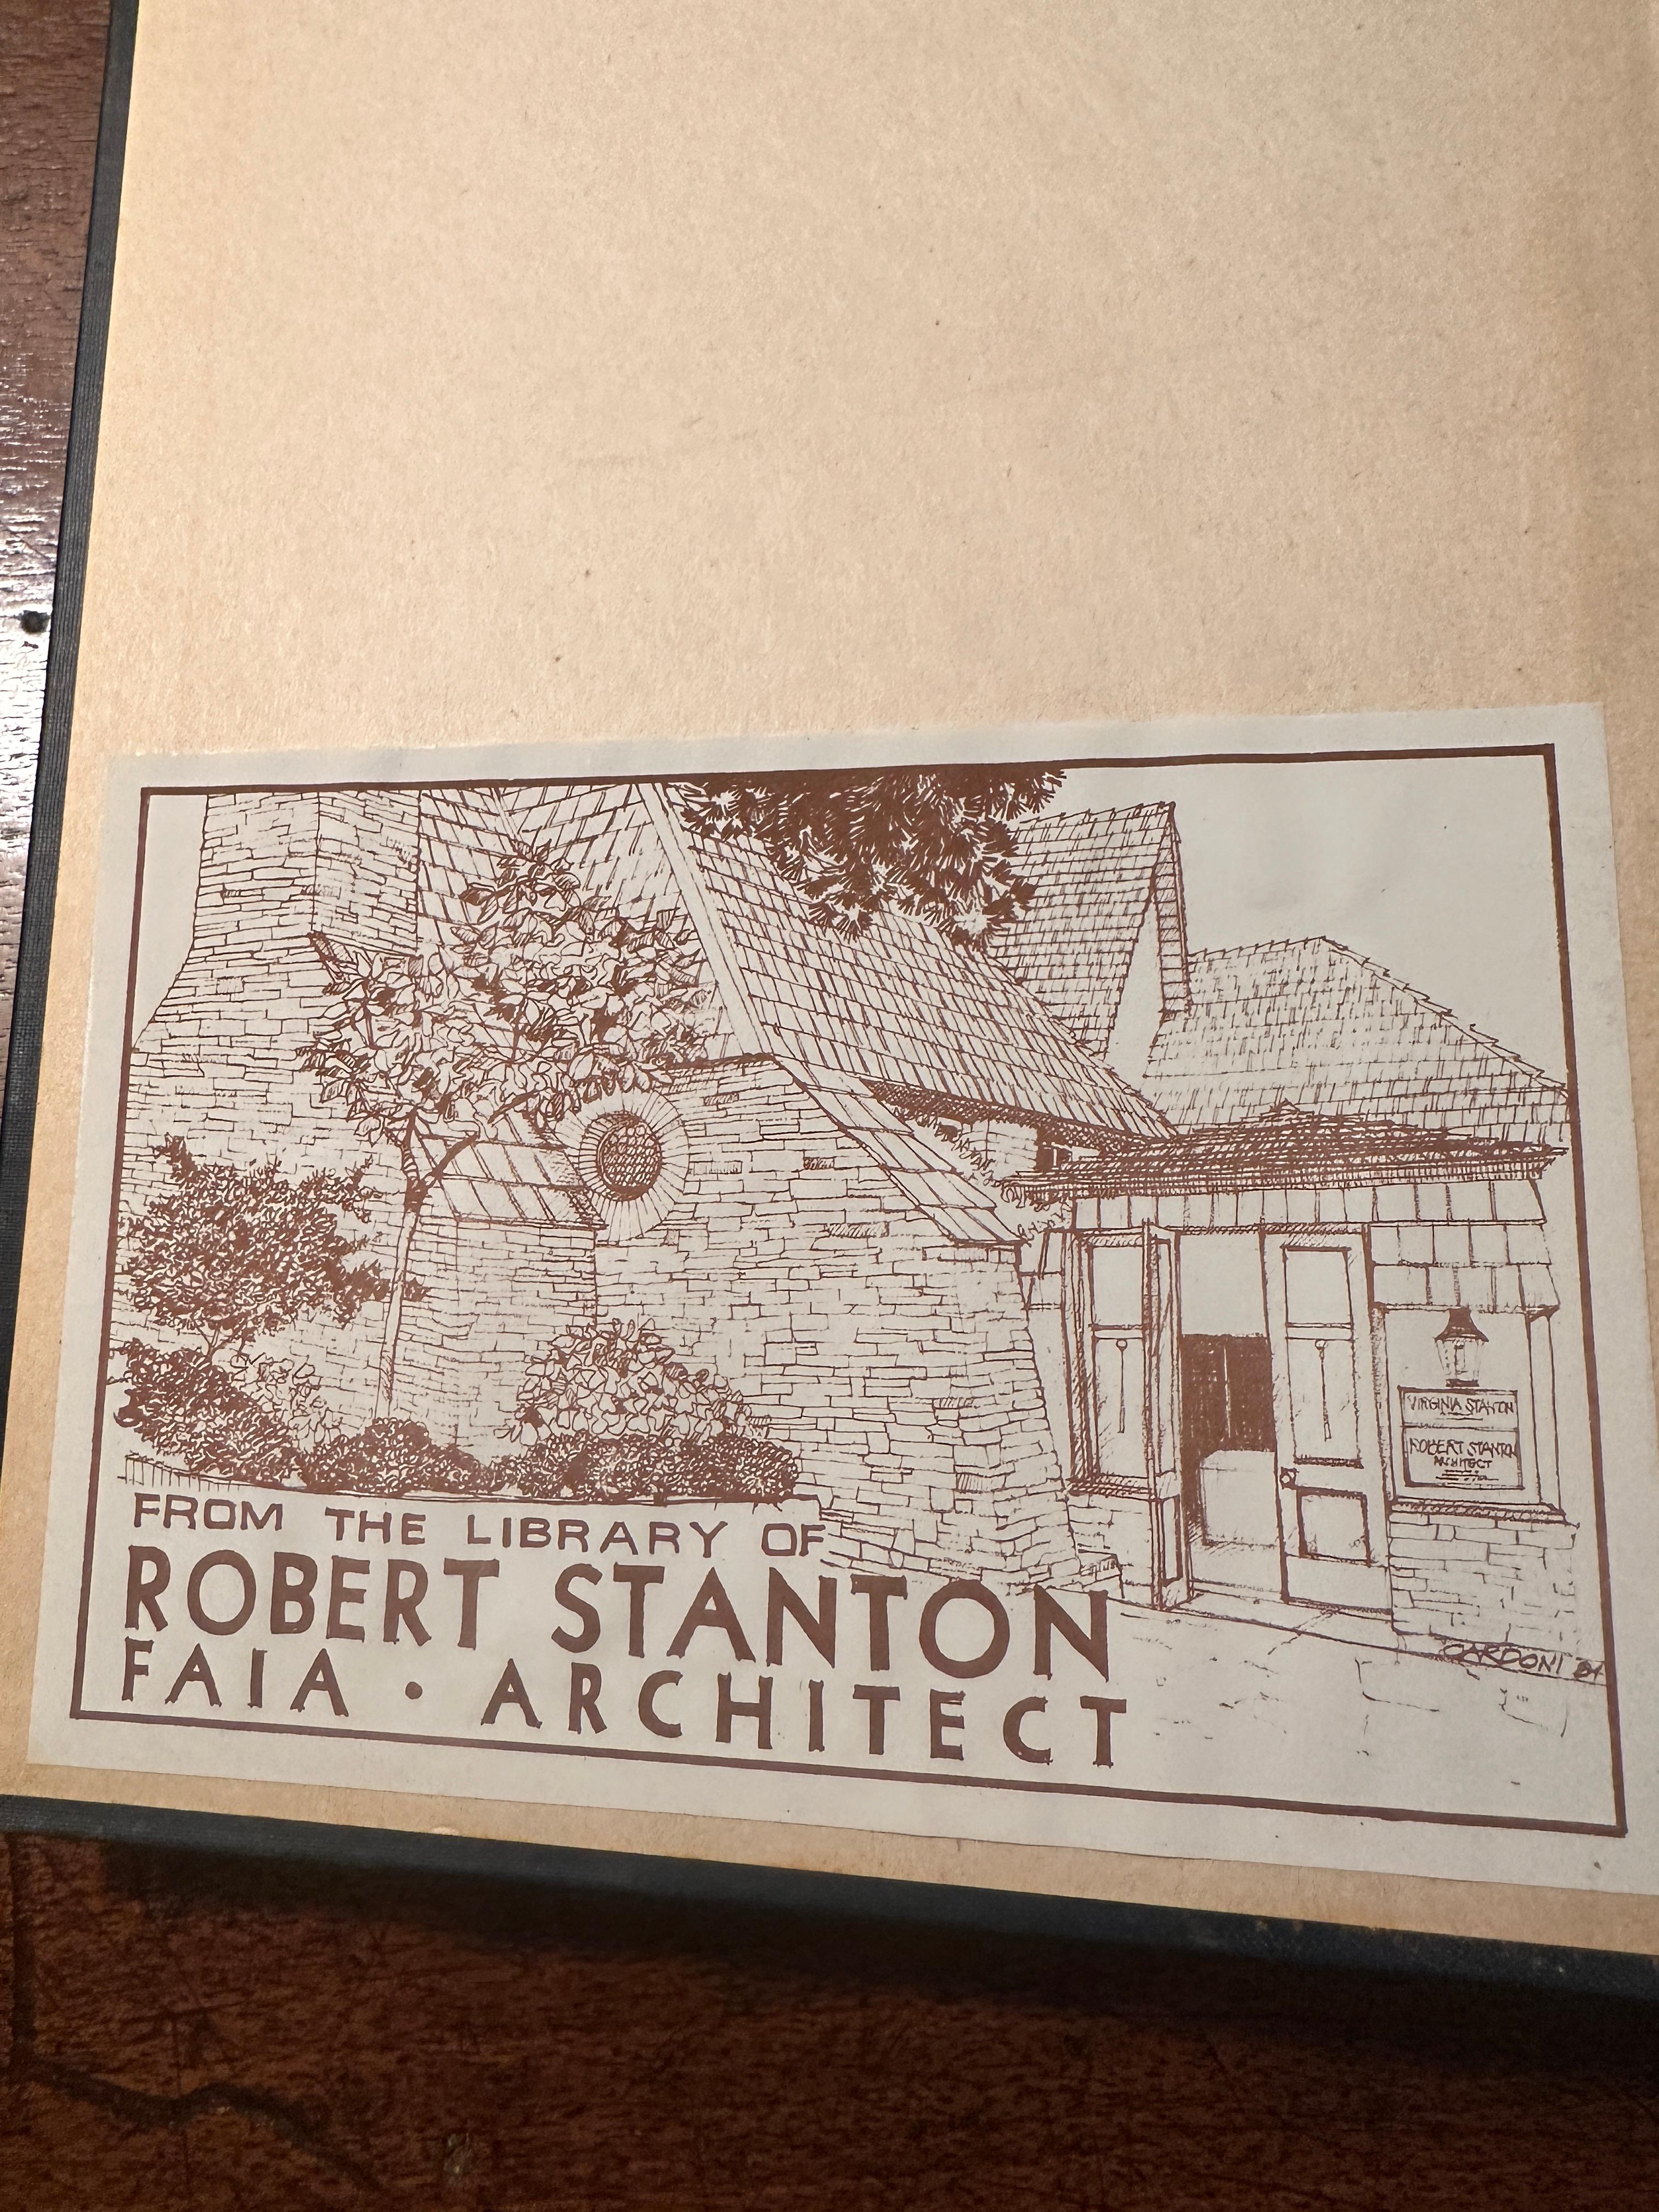 This book was sold at auction by the Monterey Public Library as part of
a large collection of books, formerly owned by the famous Architect
Robert Stanton, who inherited many books from the sister of David
Adler, Architect, Francis Elkins.